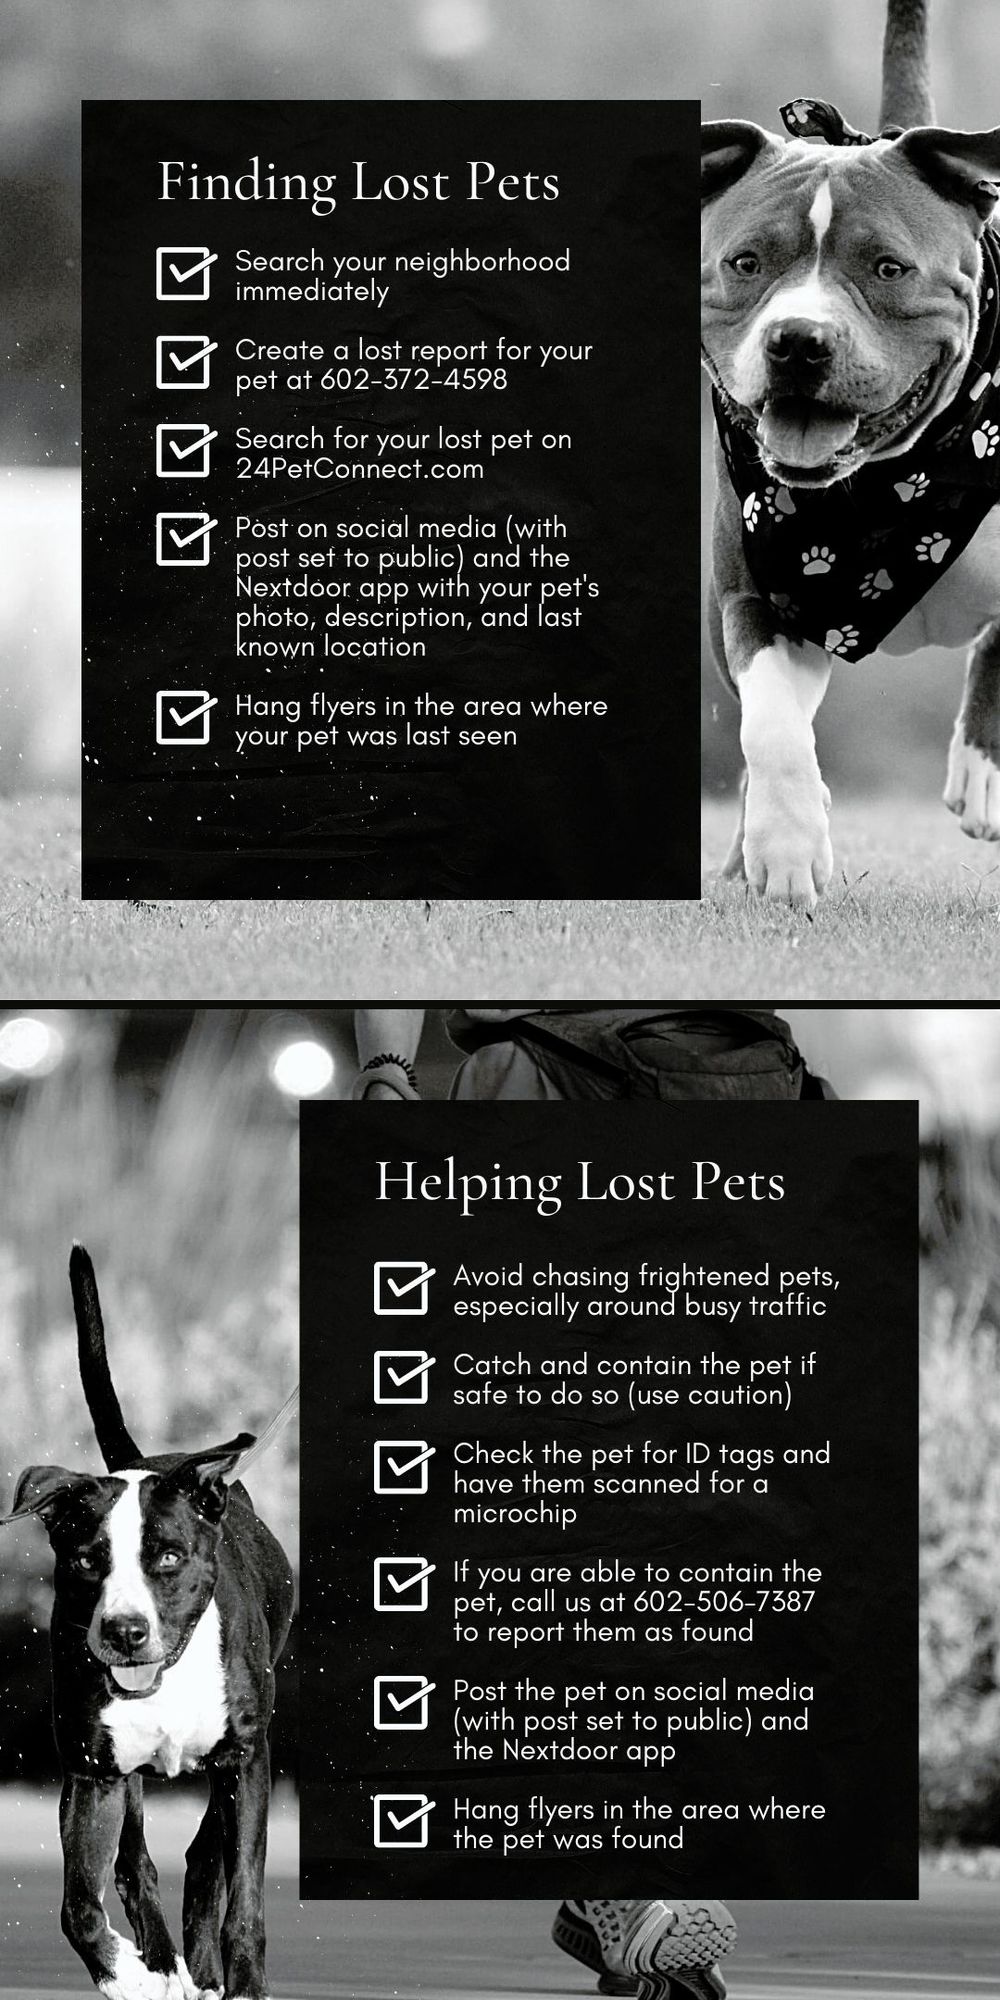 Tips for helping lost and found pets